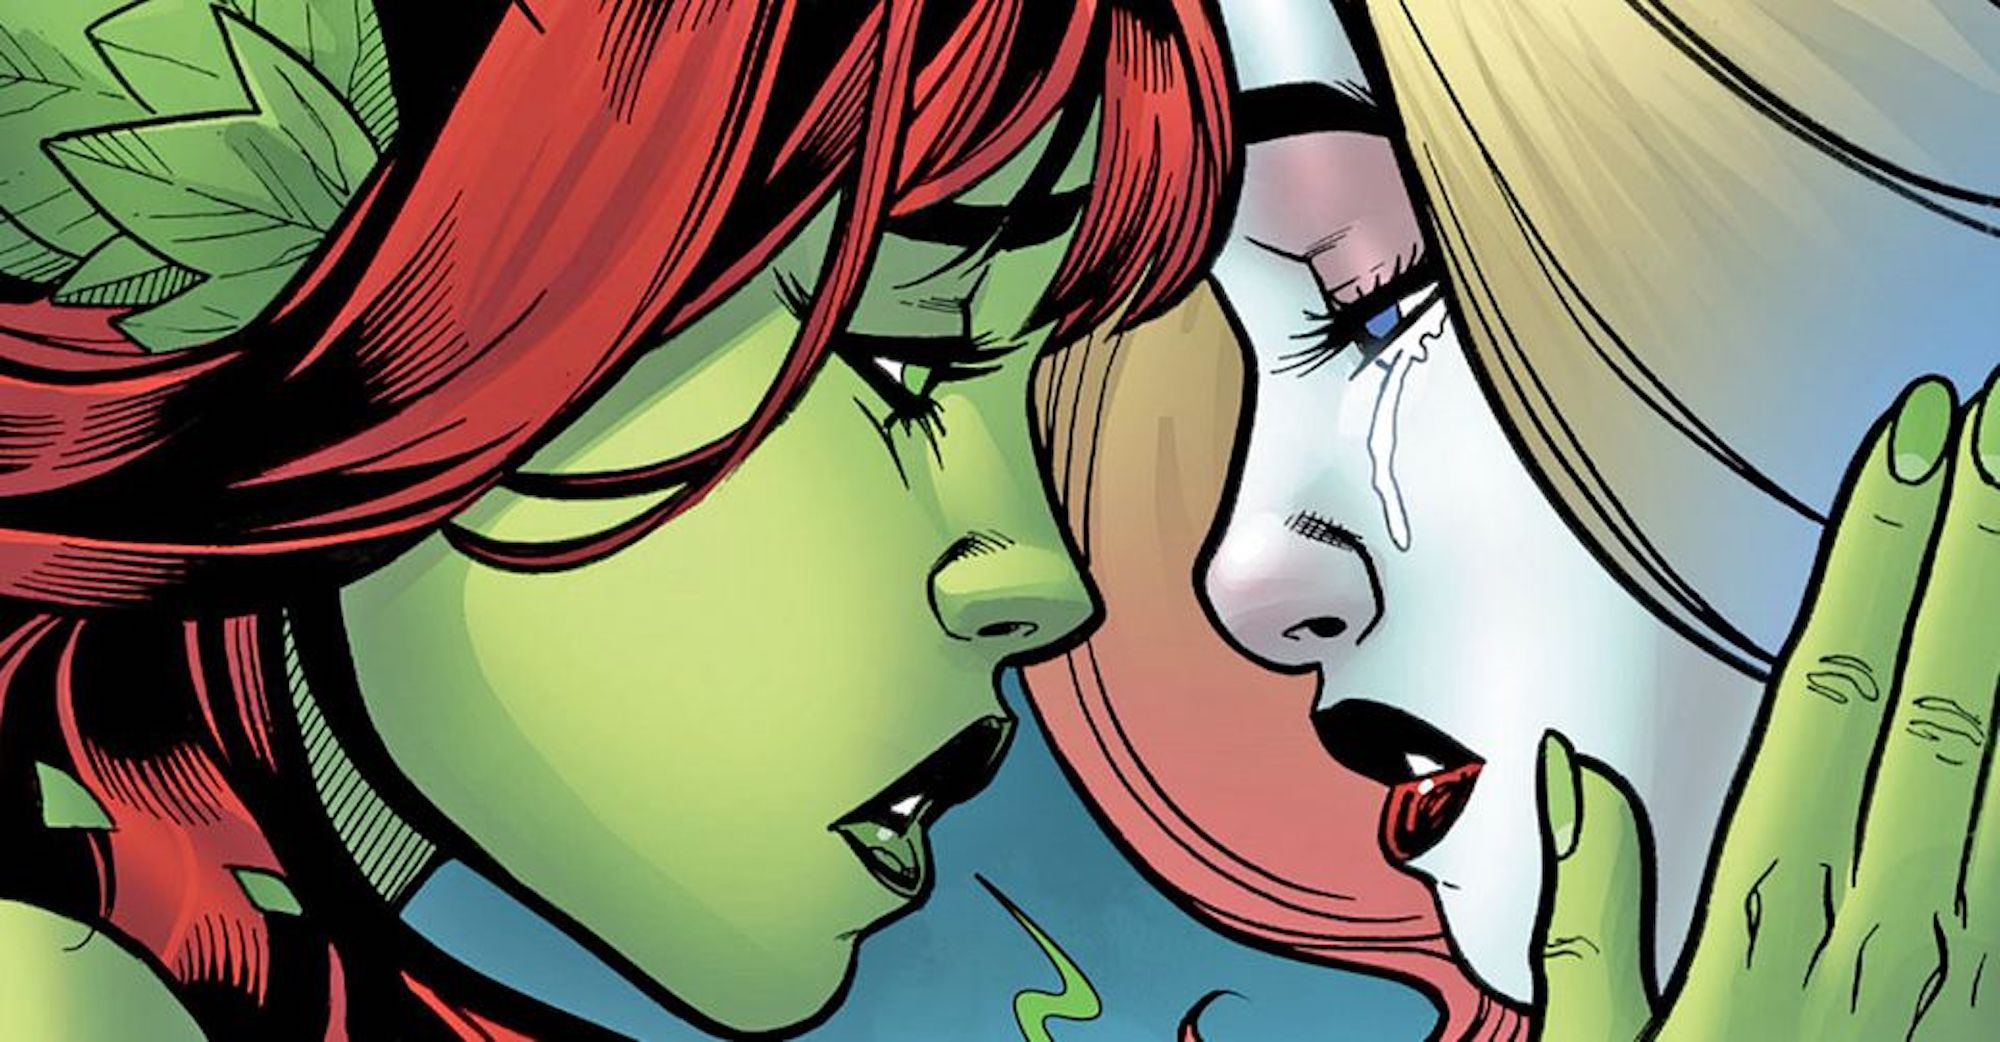 This is Harley Quinn and Poison Ivy's first comic kiss